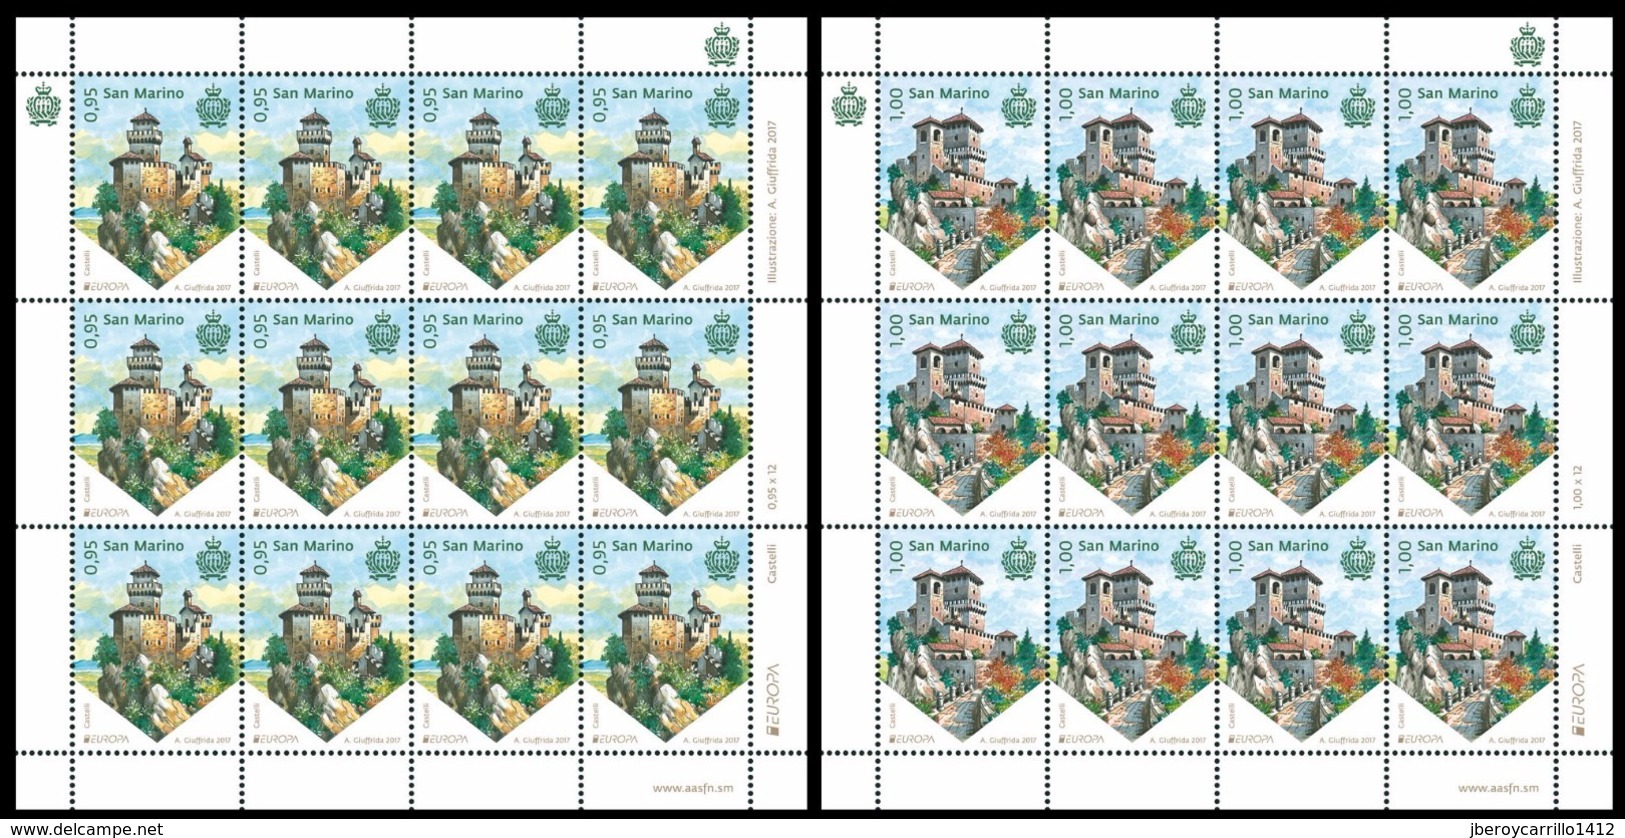 SAN MARINO - EUROPA-CEPT 2017.-TEMA:"CASTILLOS -CASTLES -CHATEAUX  - SCHLÖSSER".- SET Of 2 In TWO SHEETLETS Of 12 STAMPS - 2017